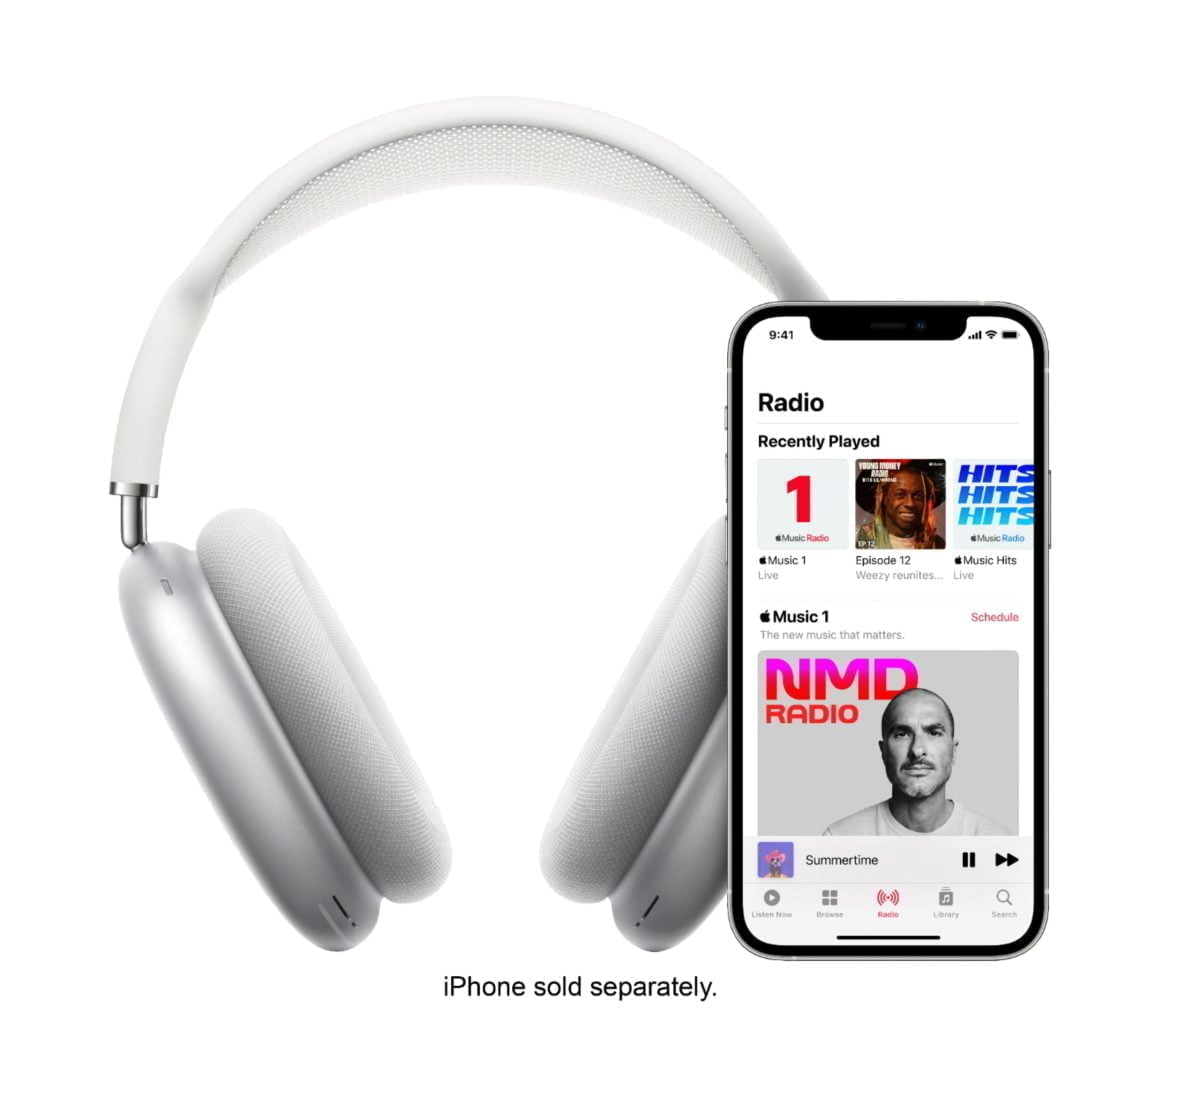 6373460Cv13D Scaled Apple &Lt;H1&Gt;Apple Airpods Max - Space Gray&Lt;/H1&Gt; &Lt;Div Class=&Quot;Long-Description-Container Body-Copy &Quot;&Gt; &Lt;Div Class=&Quot;Product-Description&Quot;&Gt;Airpods Max Reimagine Over-Ear Headphones. An Apple-Designed Dynamic Driver Provides Immersive High-Fidelity Audio. Every Detail, From Canopy To Cushions, Has Been Designed For An Exceptional Fit. Active Noise Cancellation Blocks Outside Noise, While Transparency Mode Lets It In. And Spatial Audio With Dynamic Head Tracking Provides Theater-Like Sound That Surrounds You.&Lt;/Div&Gt; &Lt;/Div&Gt; Airpods Max Apple Airpods Max - Space Gray Mgyh3